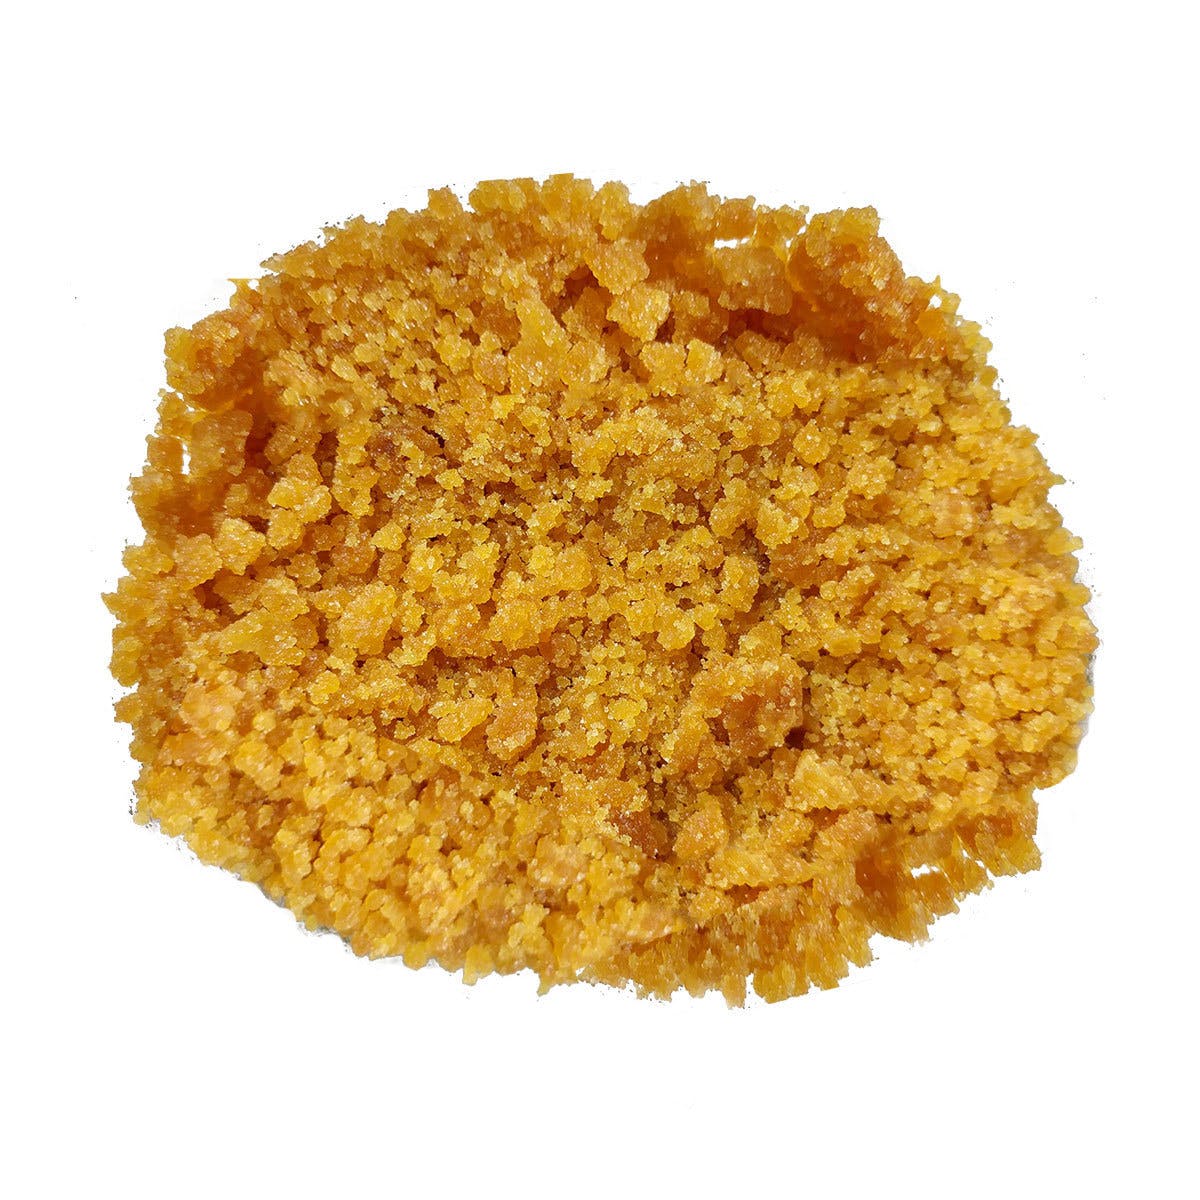 concentrate-made-products-1g-live-resin-ak-48